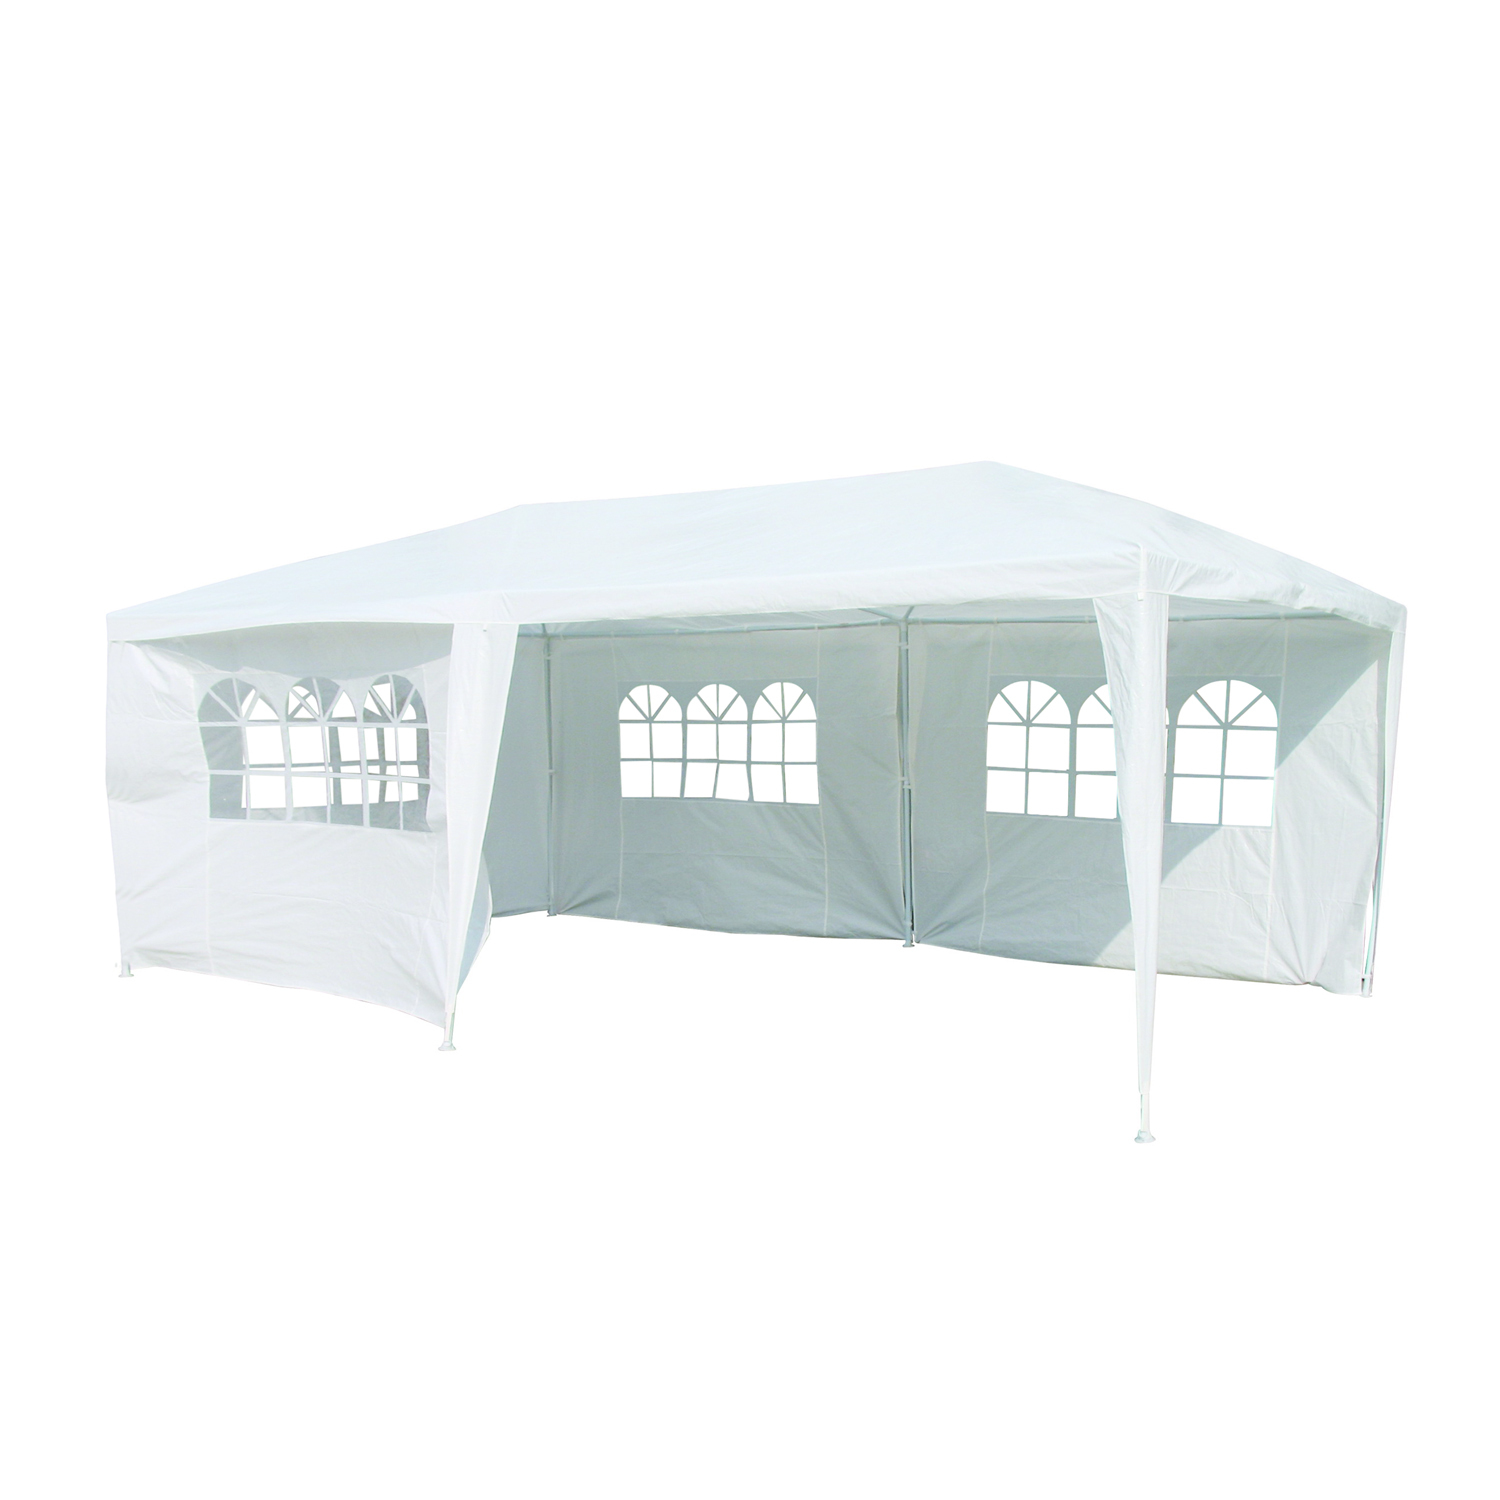 3 x 6m White Outdoor Party Tent Image 2